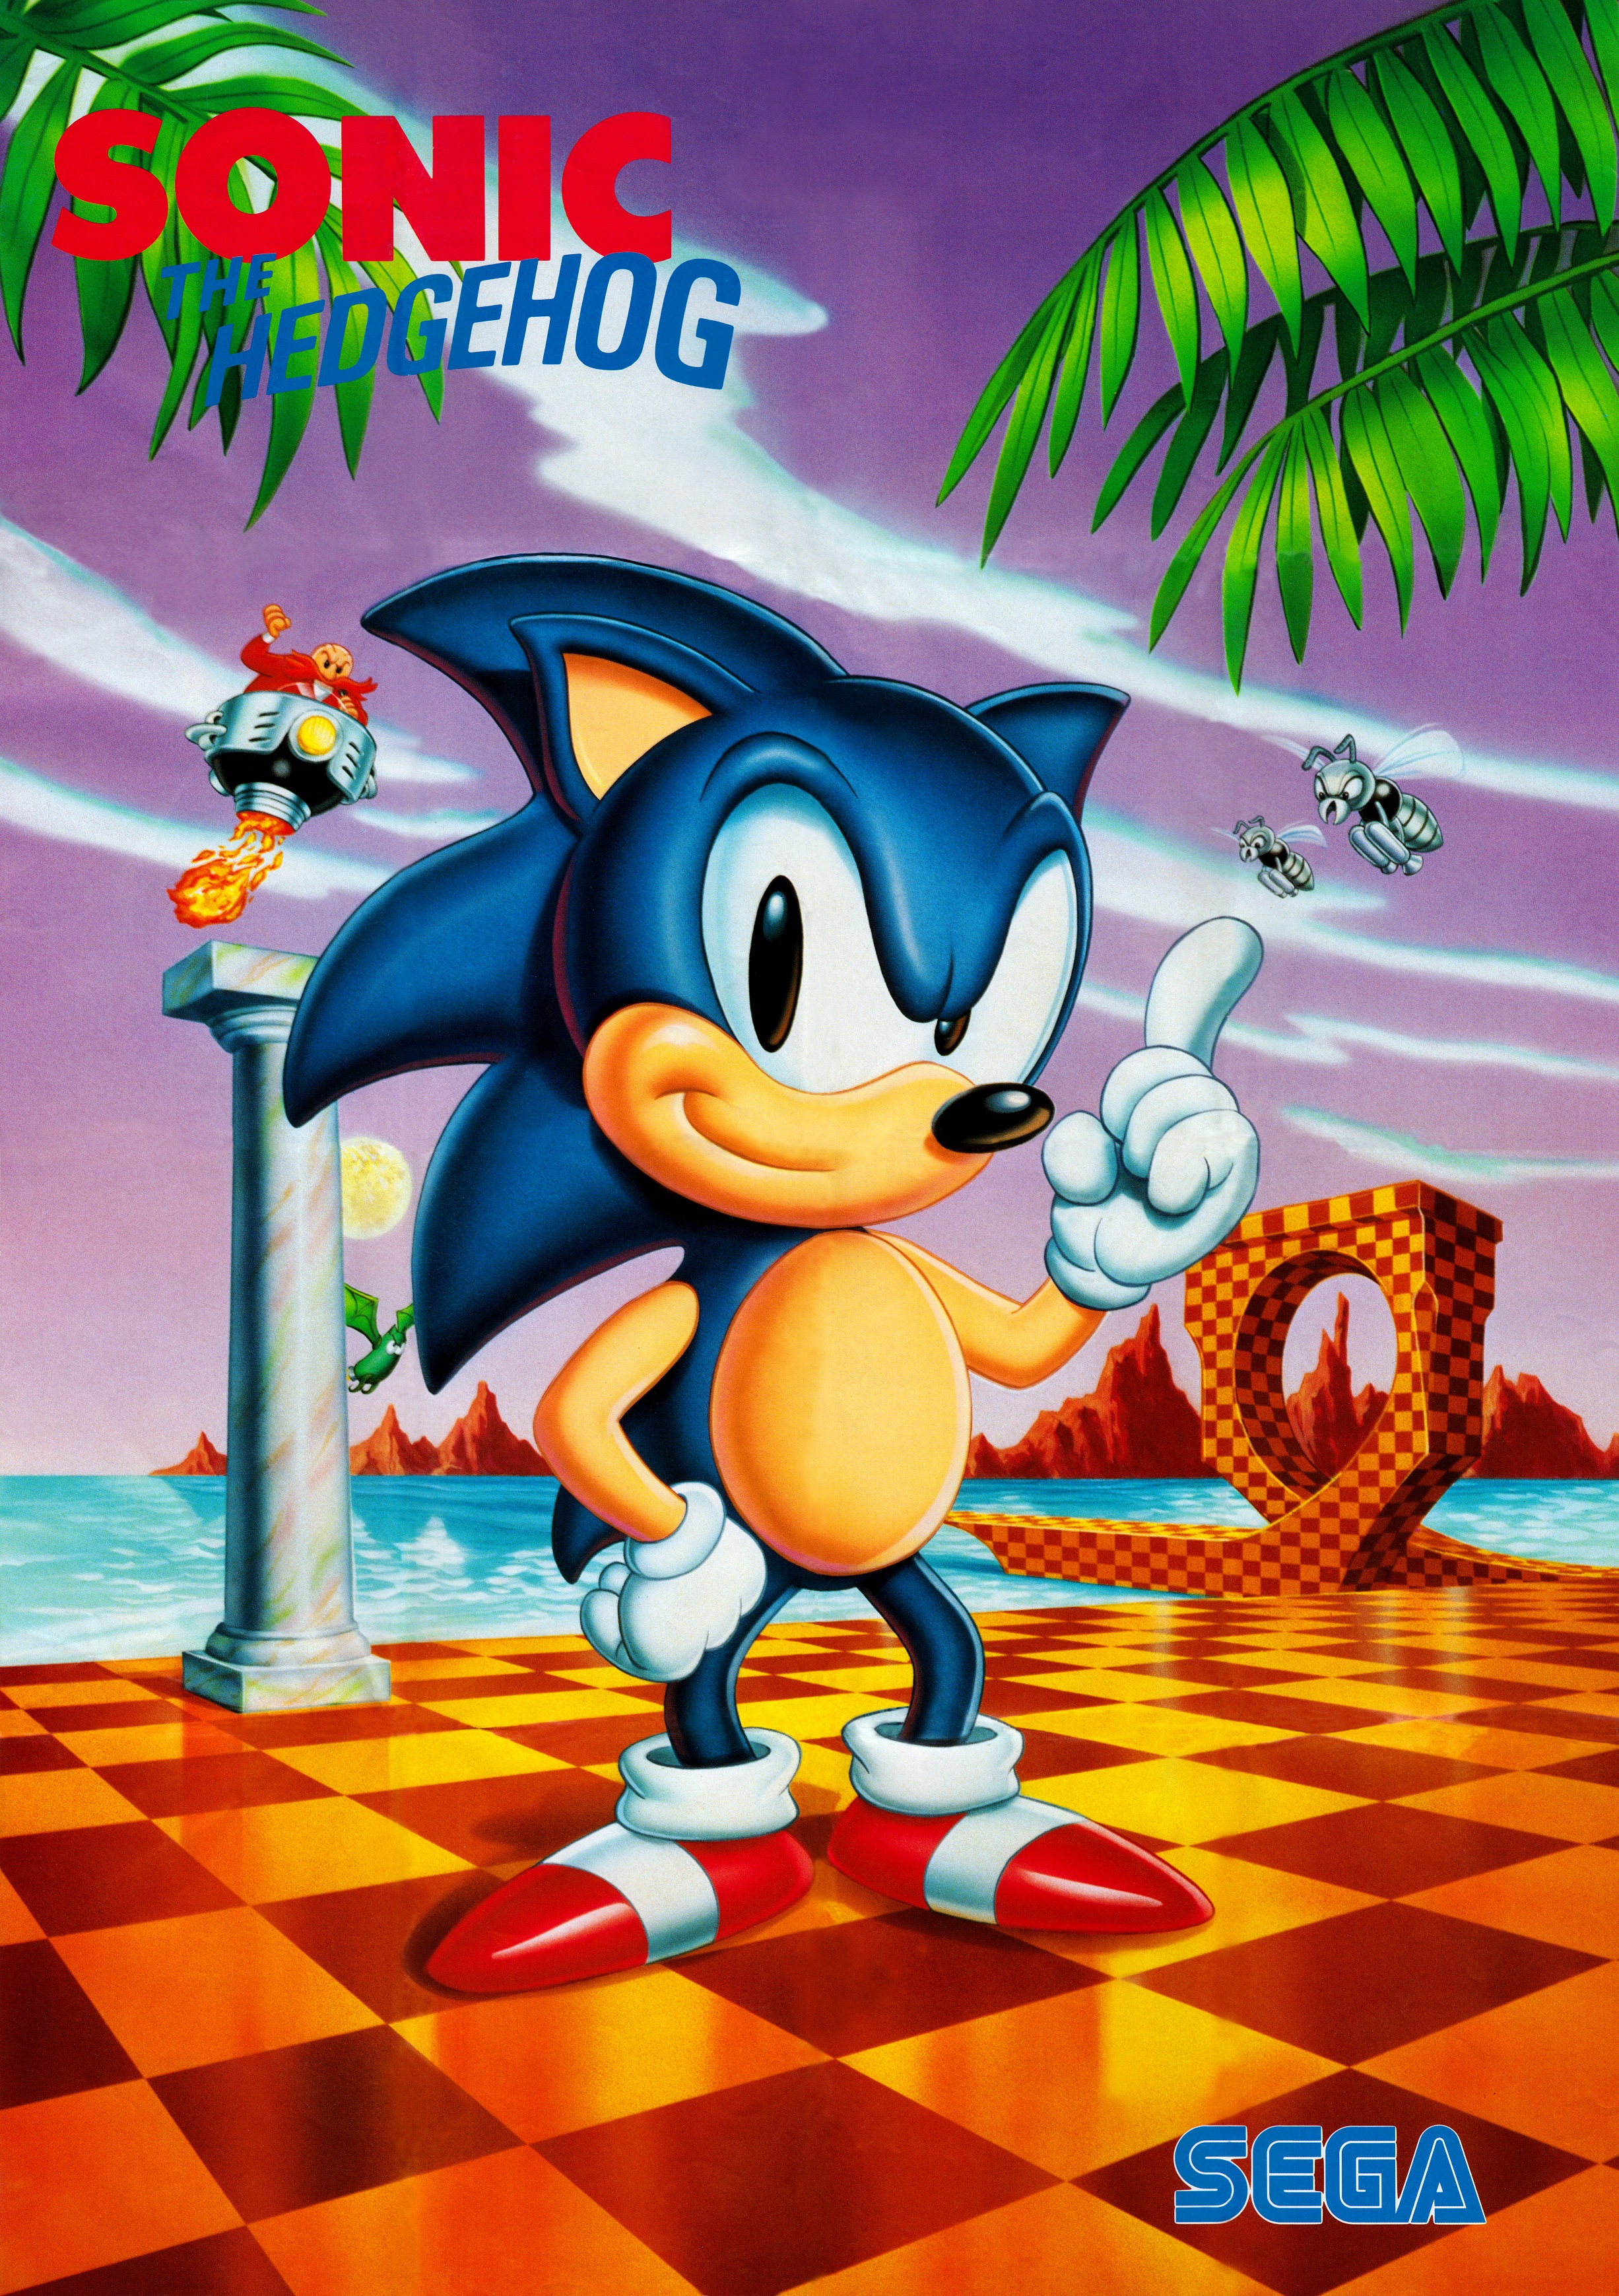 Sonic the Hedgehog (1991) Wallpapers